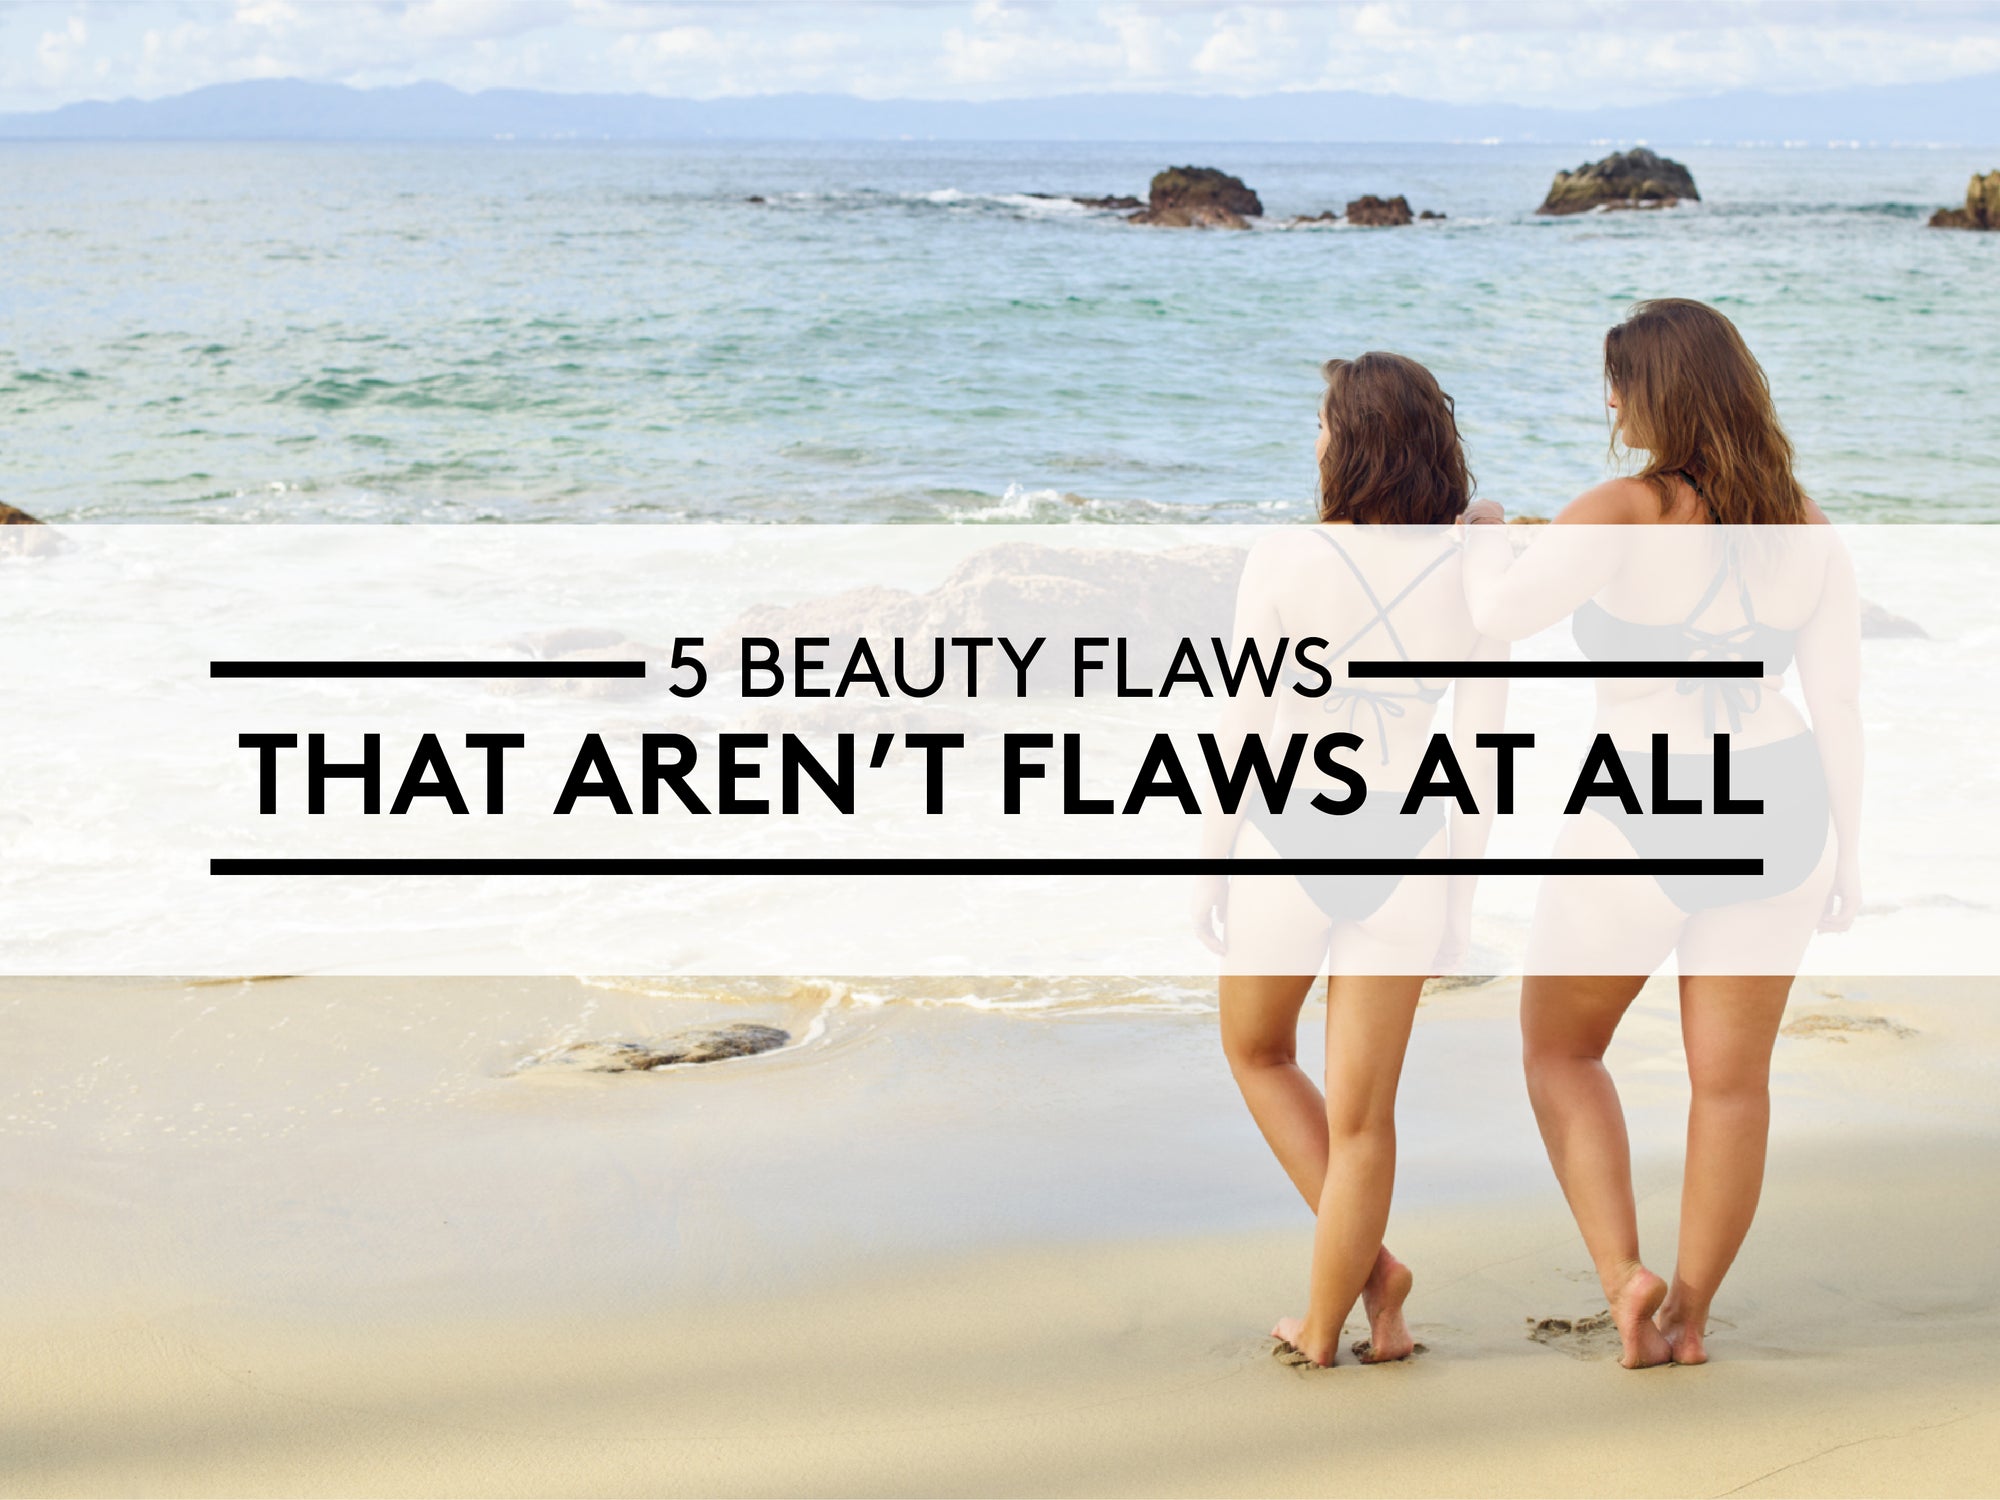 5 Beauty Flaws That Aren’t Flaws at All